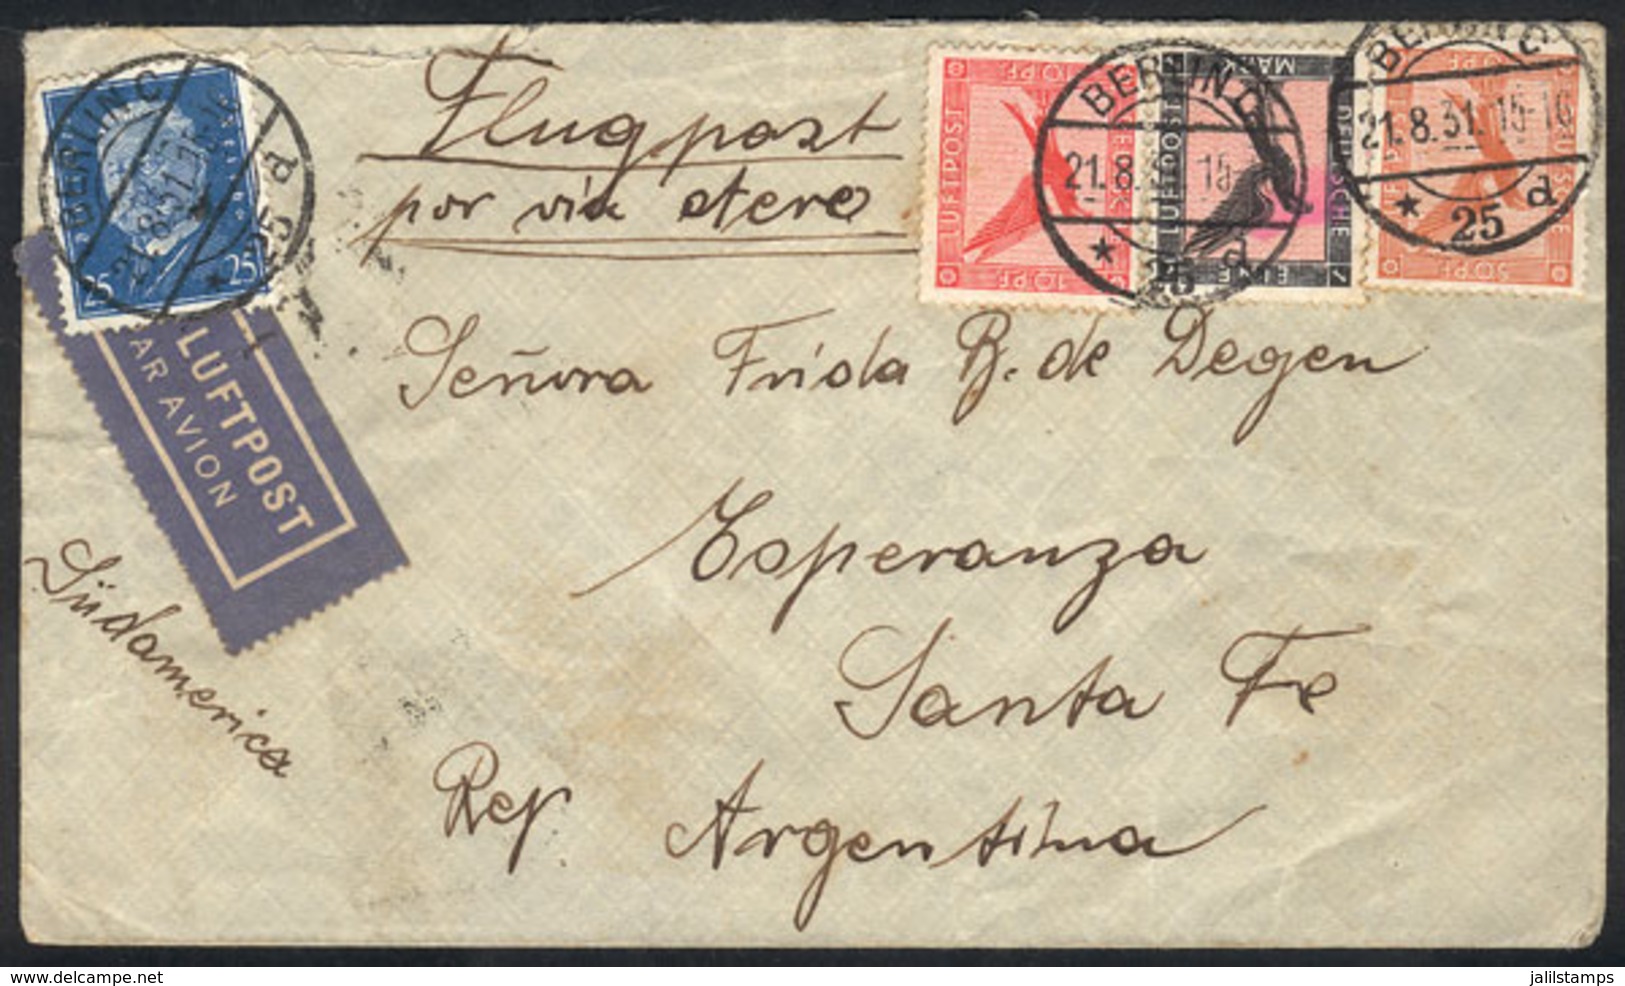 GERMANY: Airmail Cover Sent From Berlin To Argentina On 21/AU/1931 By Air France (transit Backstamp Of Strasbourg) Frank - Prefilatelia